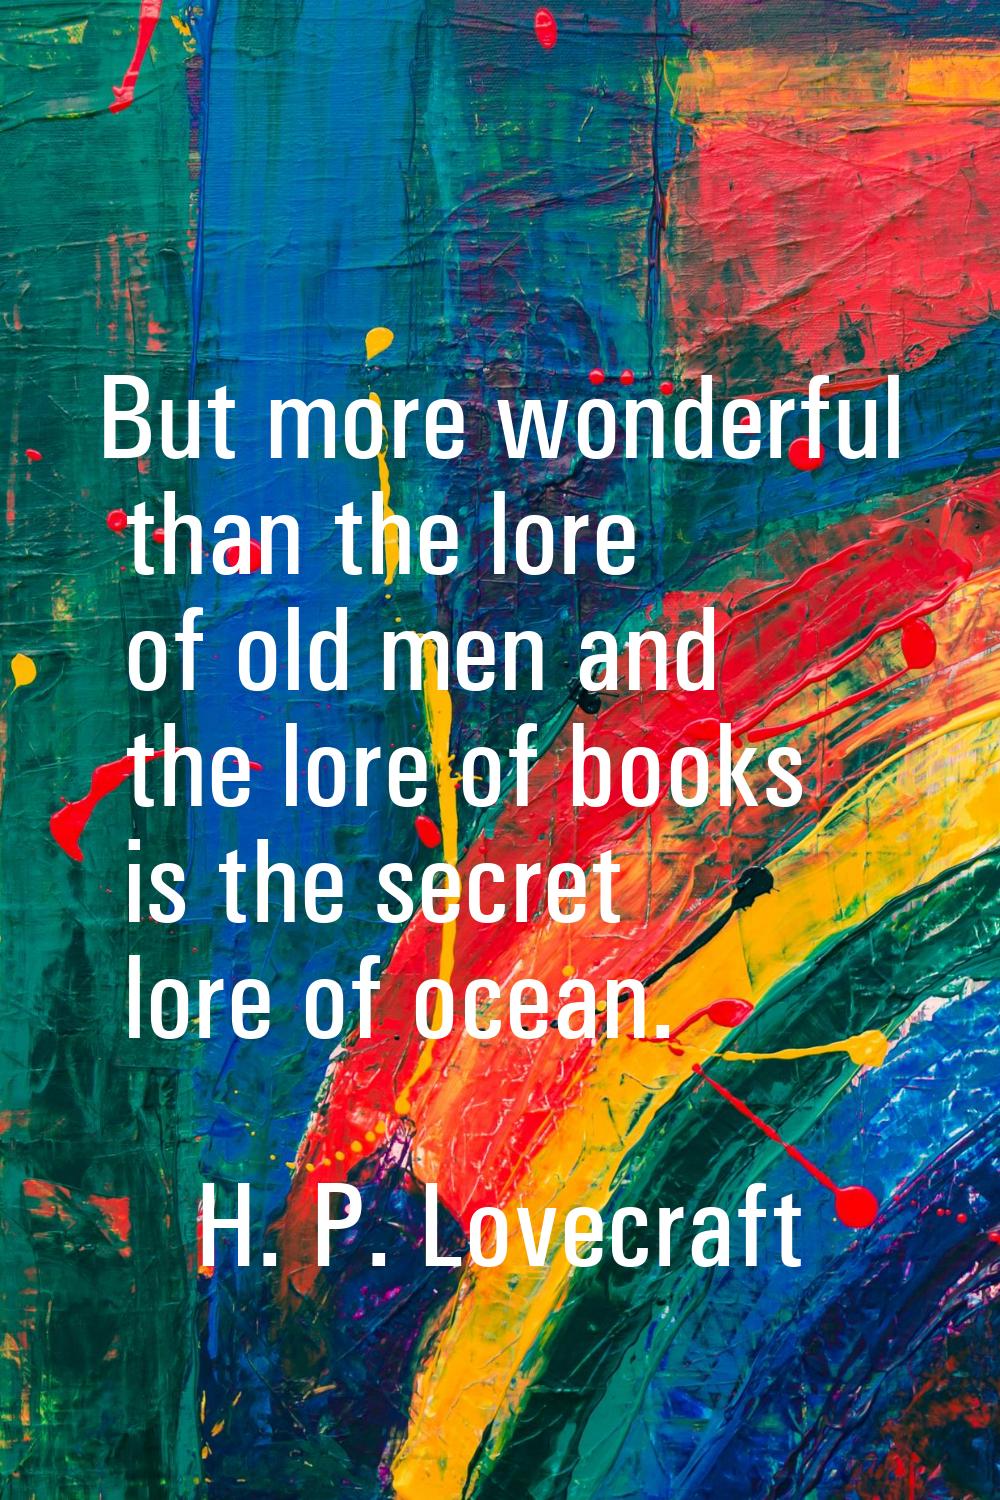 But more wonderful than the lore of old men and the lore of books is the secret lore of ocean.